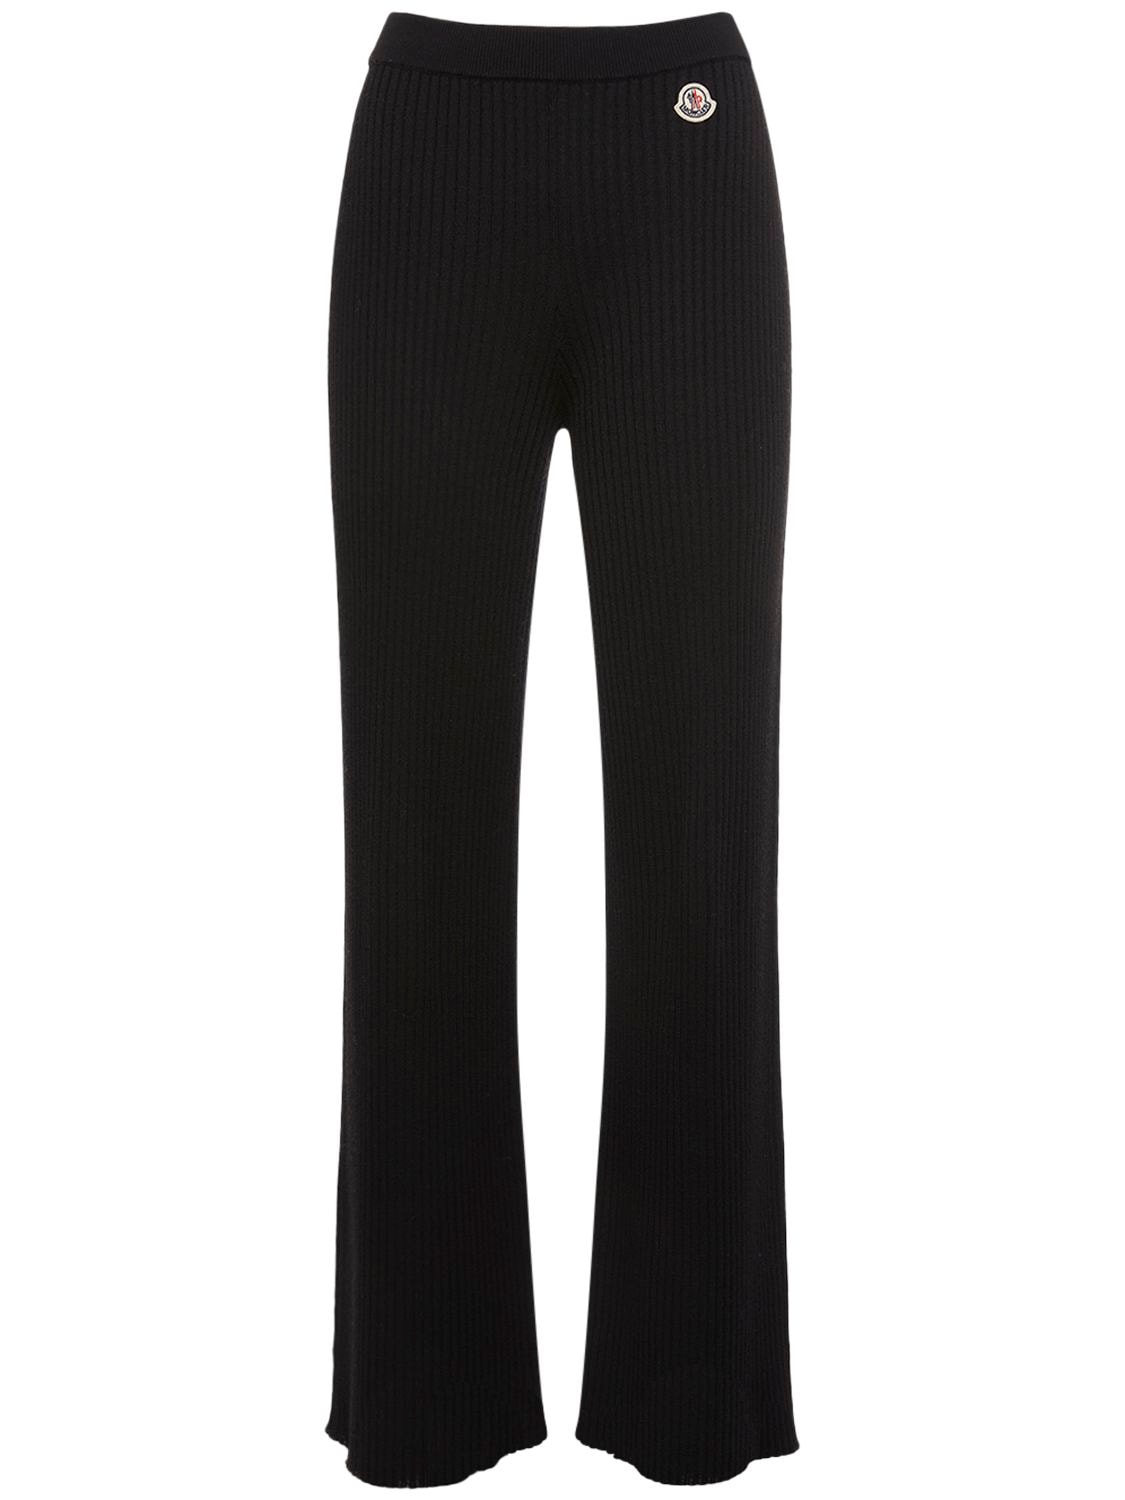 Image of Tricot Wool Blend Pants